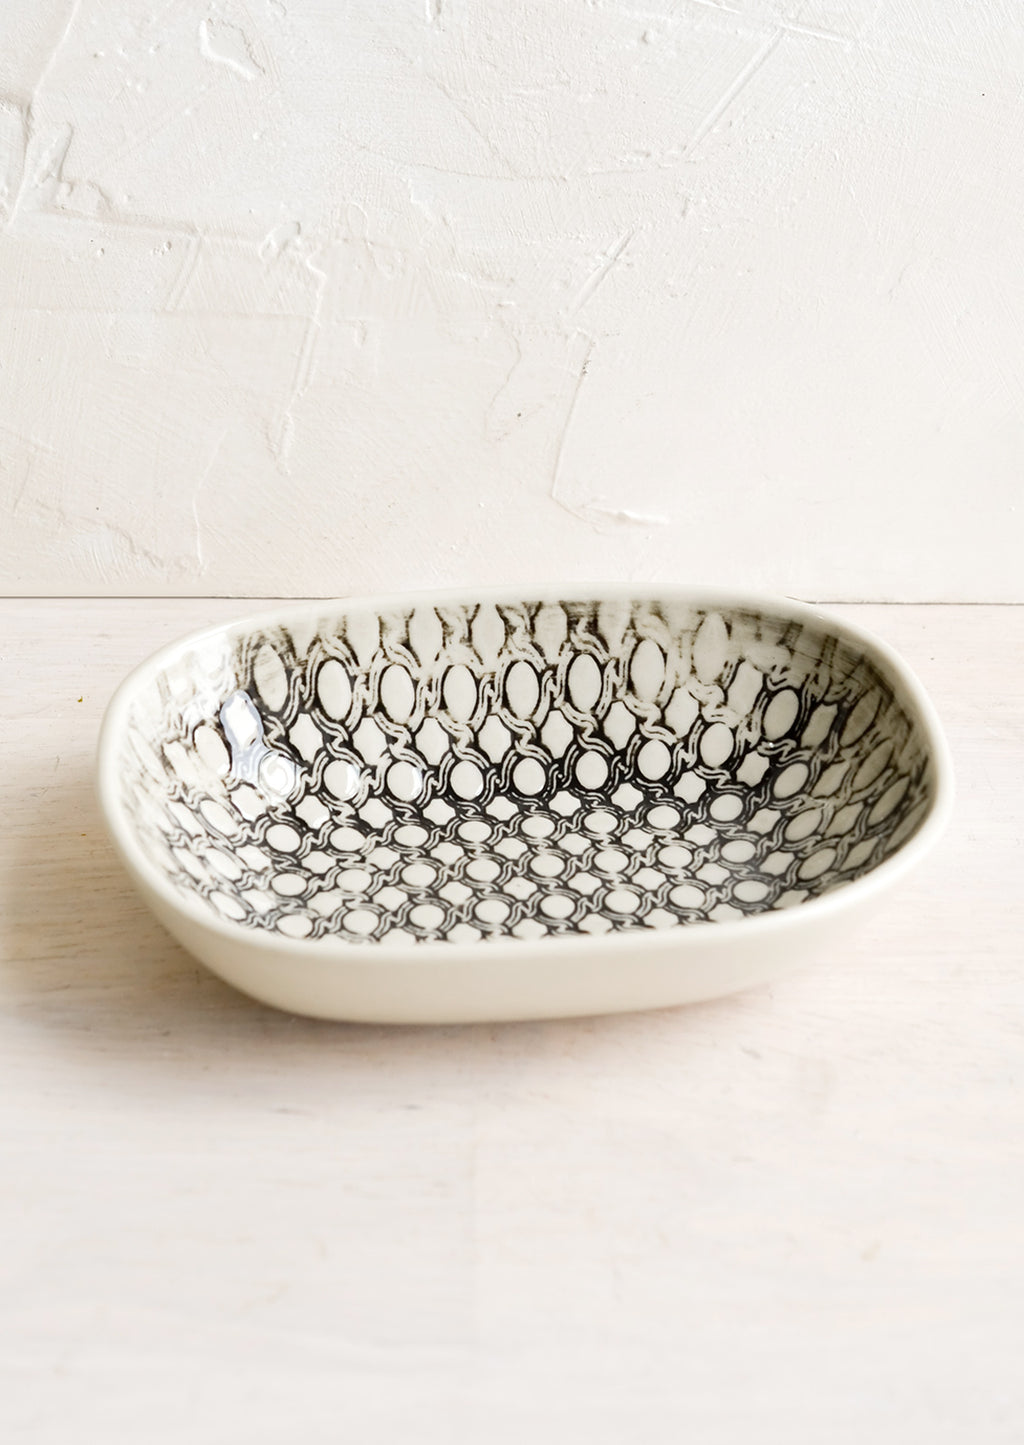 Woven Rope Print: A small oval ceramic dish in rope pattern.